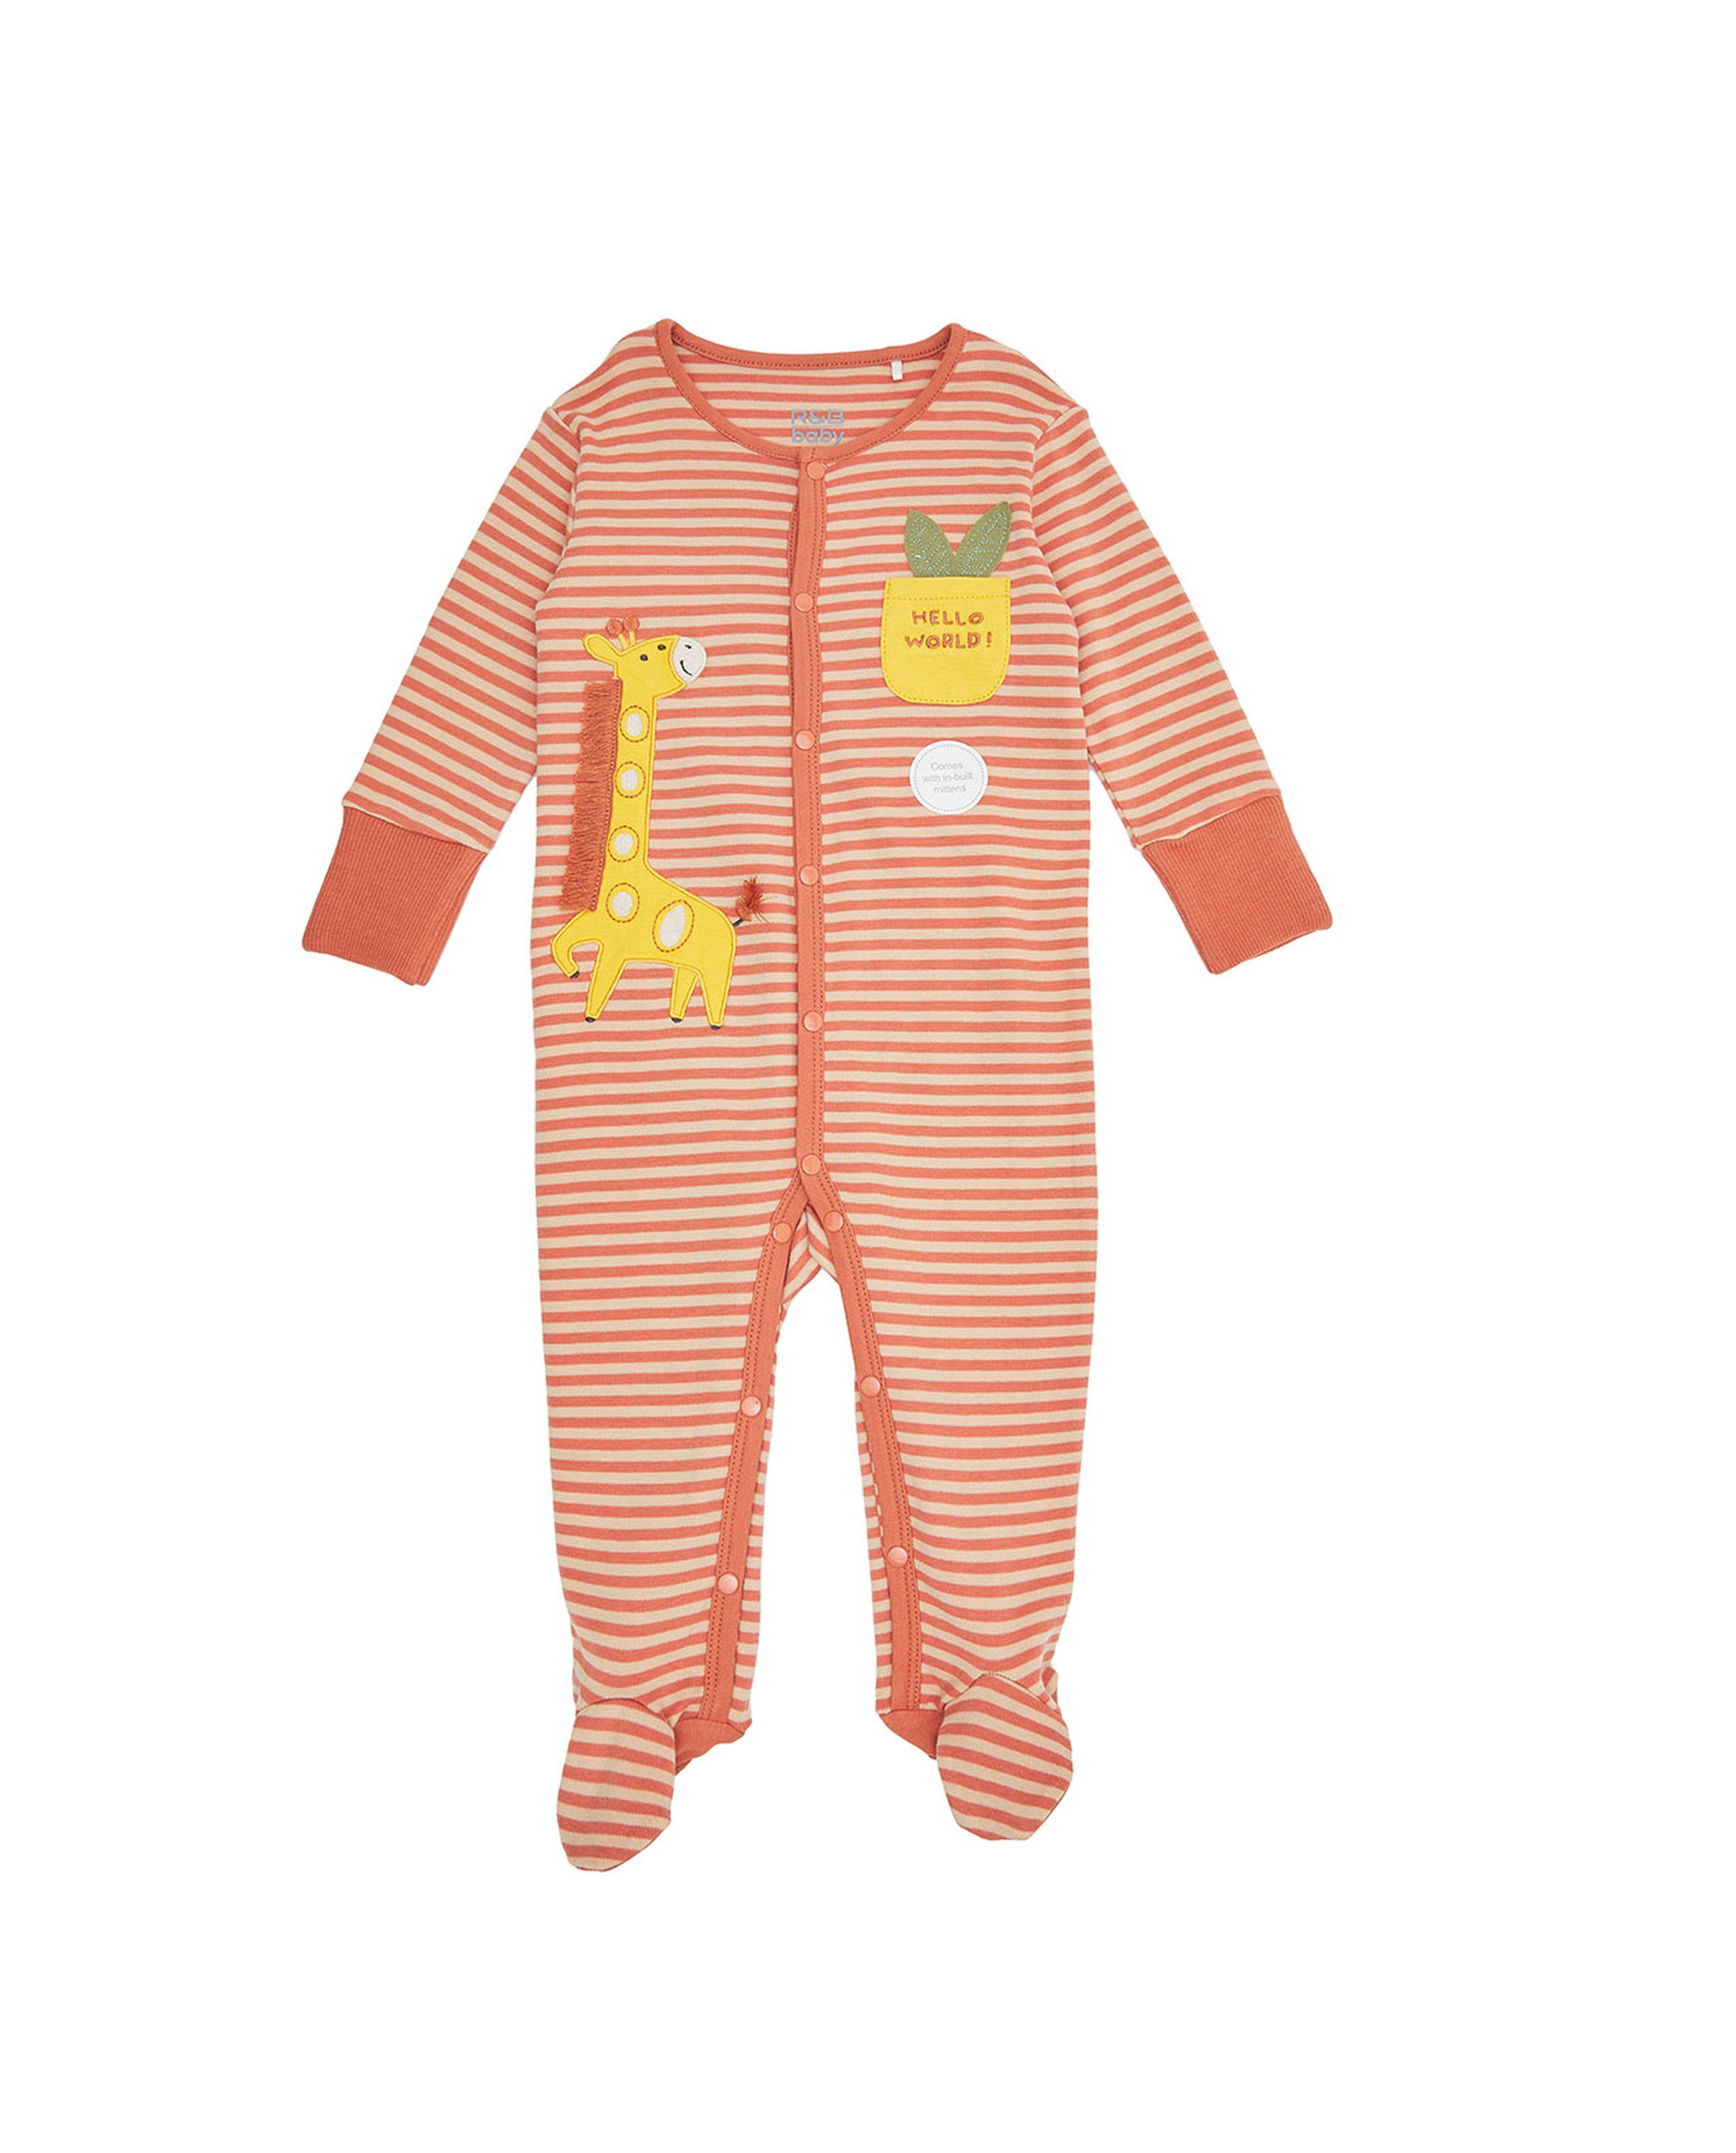 Striped Footed Sleepsuit